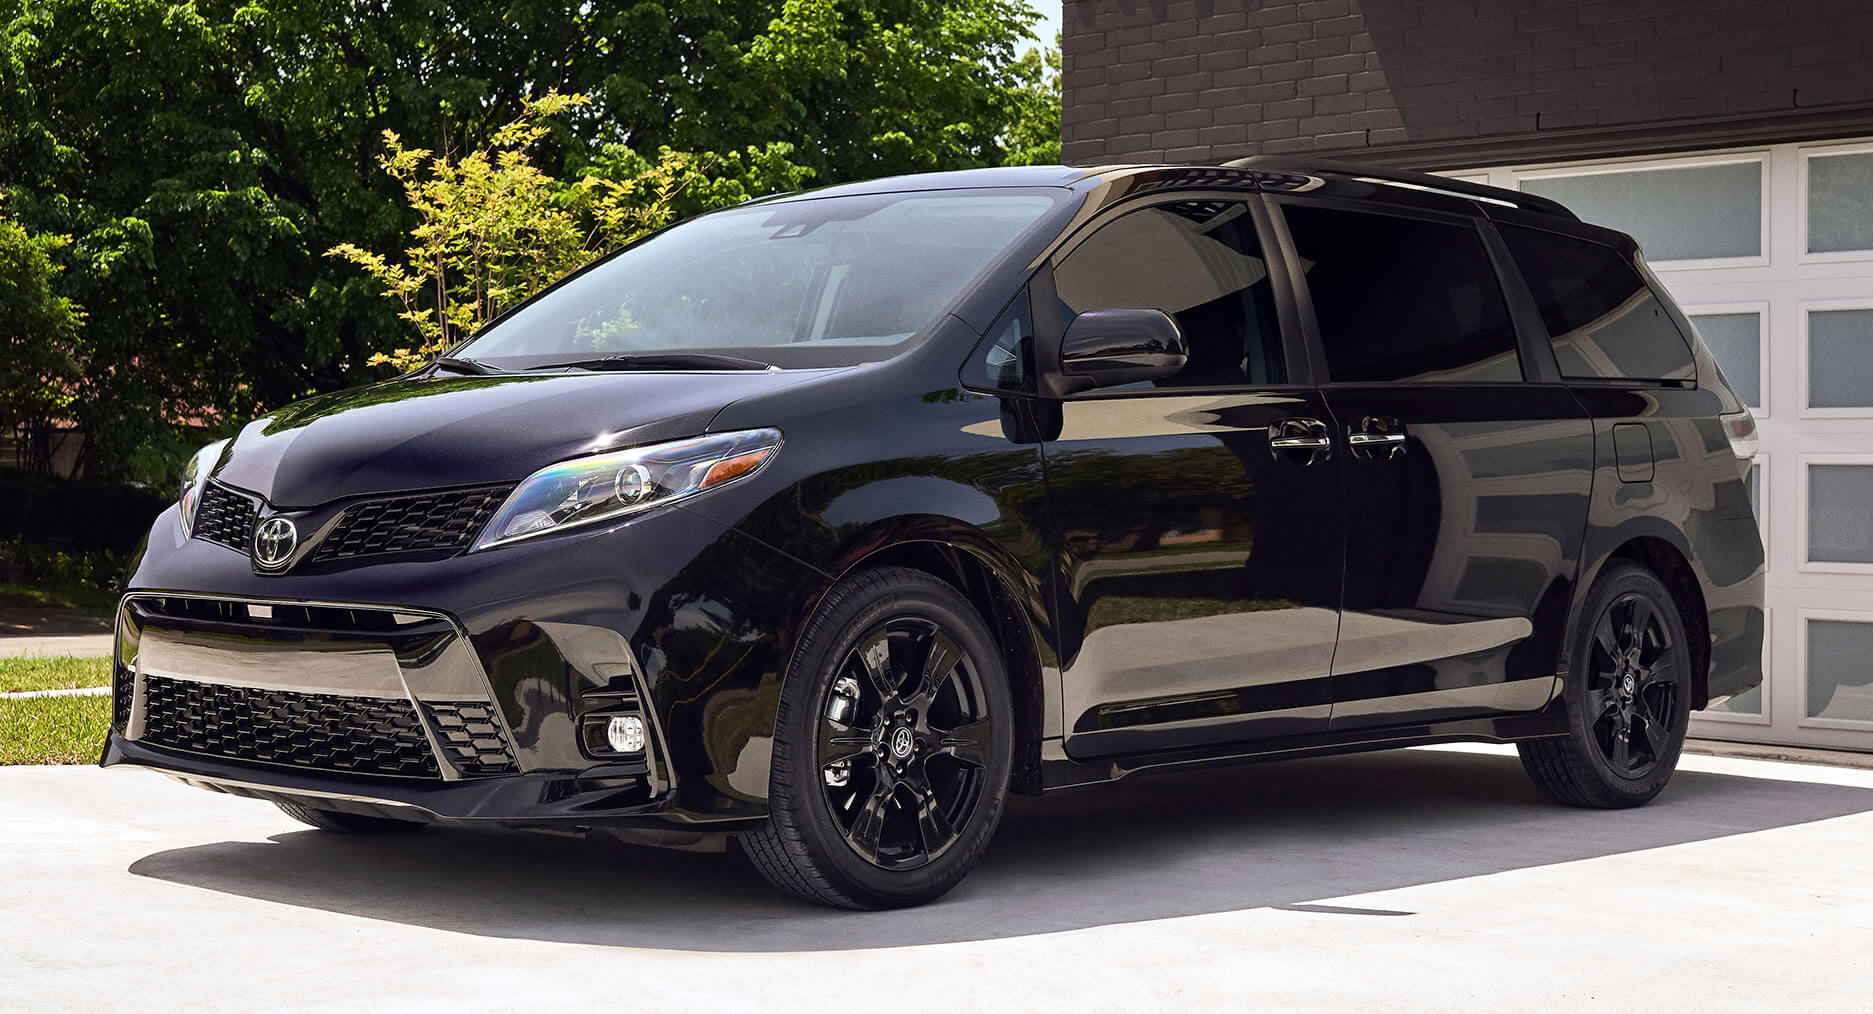 Toyota Sienna Gets Minor Updates, Nightshade Edition For 2020MY | Carscoops